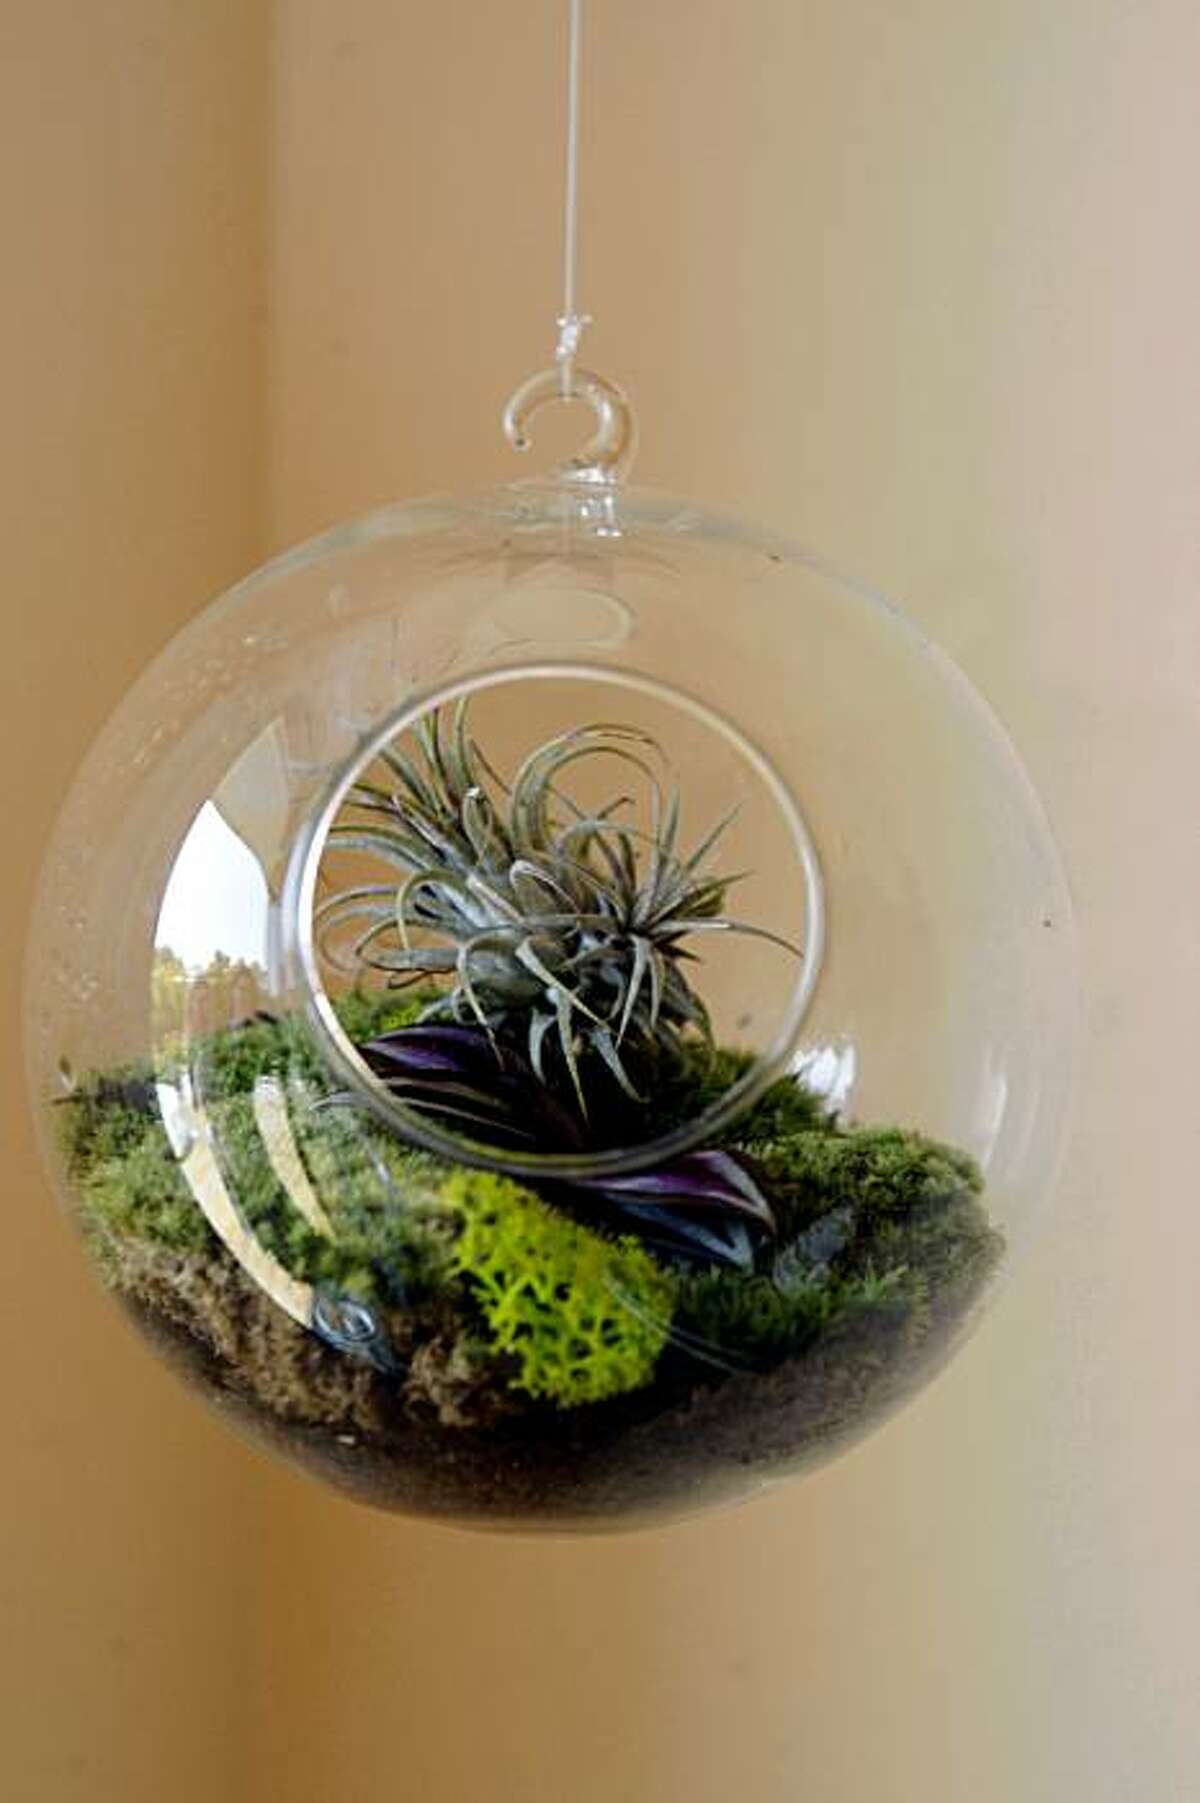 A hanging terrarium called "Suspended Serenity" made by artist Kat Geiger in Oakland, Calif., on Wednesday, August 19, 2009.